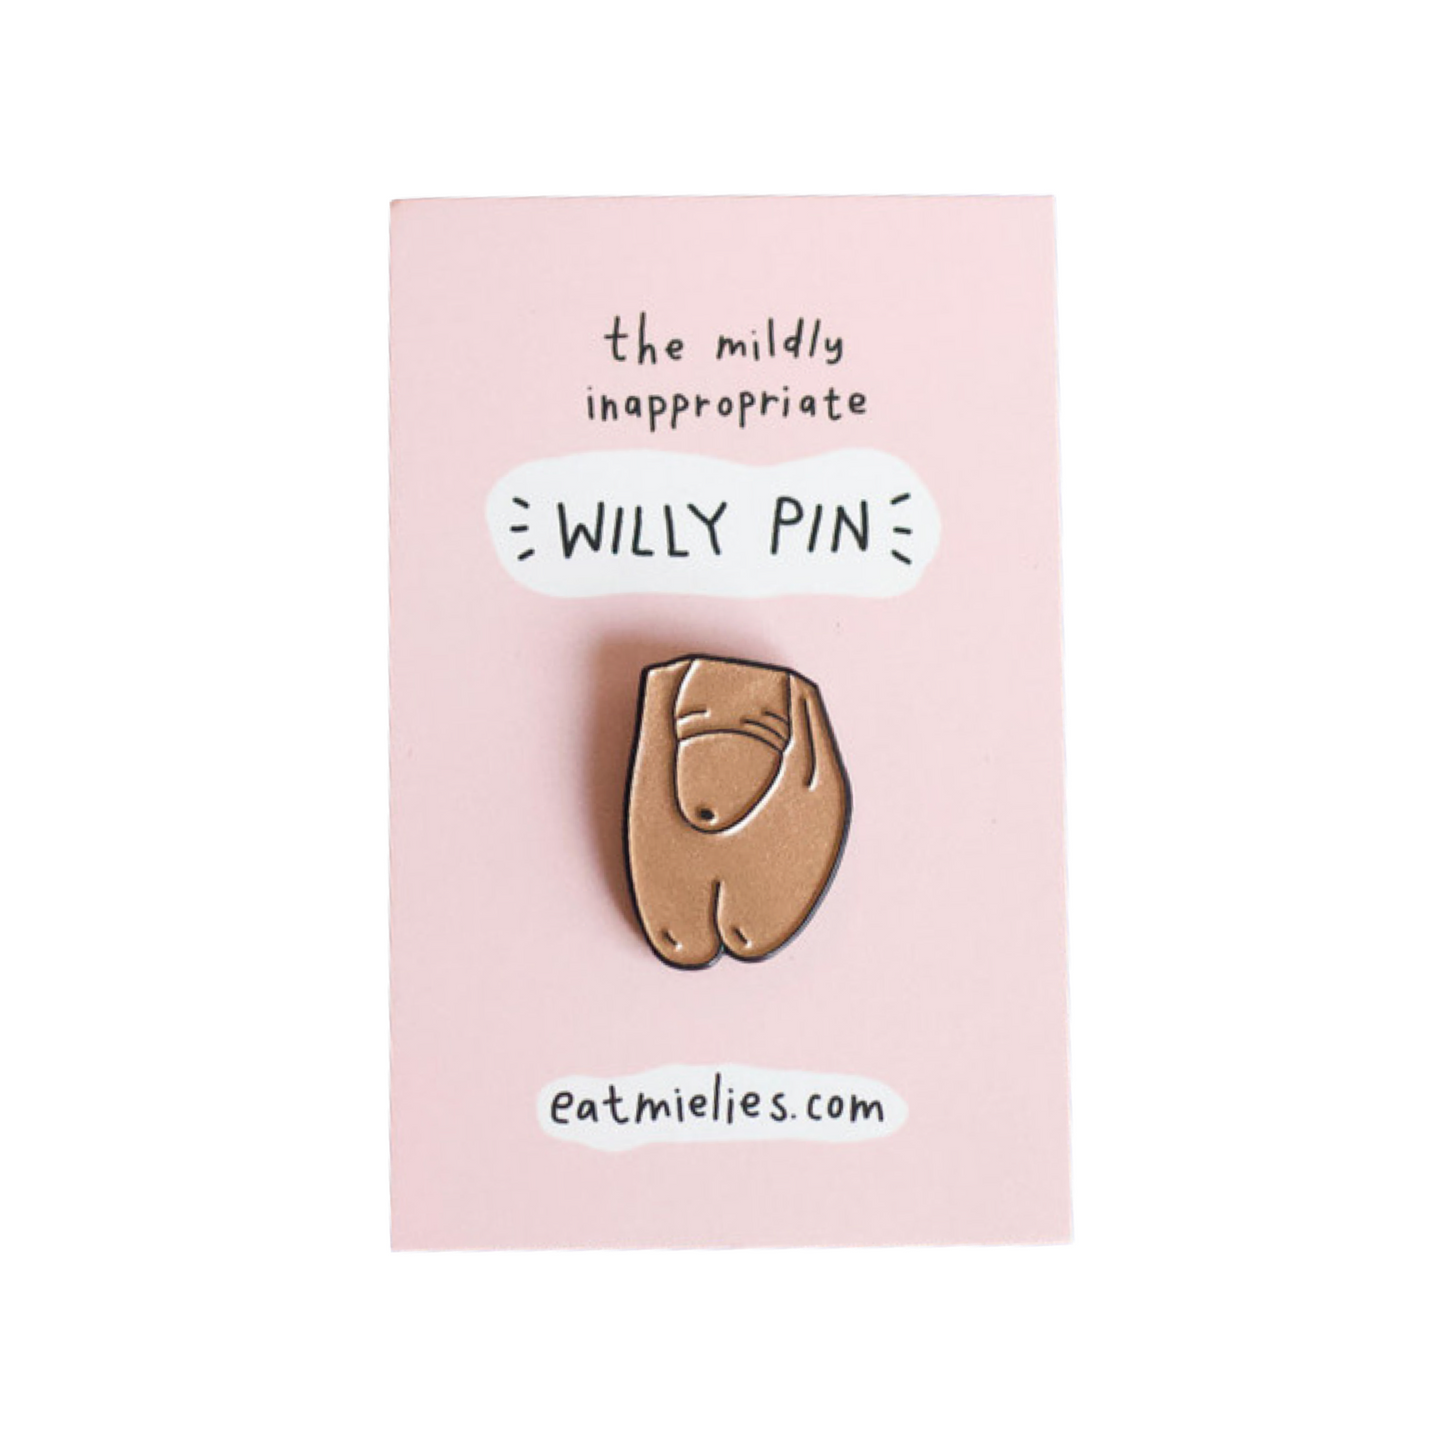 willy pin